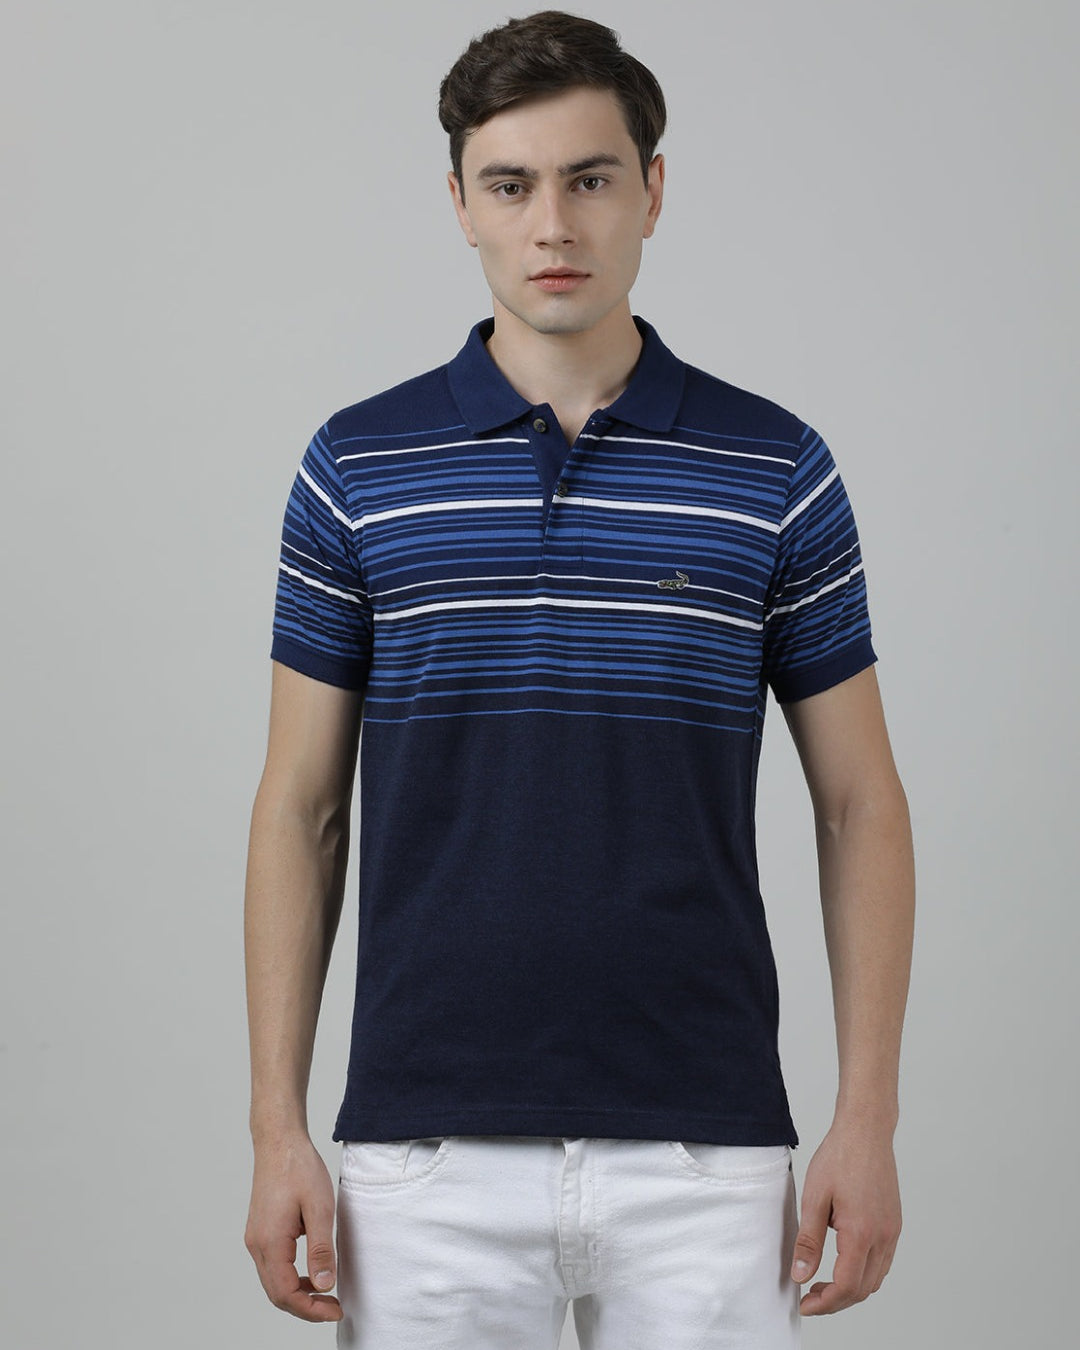 Casual Blue T-Shirt Half Sleeve Slim Fit Jersey Engineering Stripe with Collar for Men